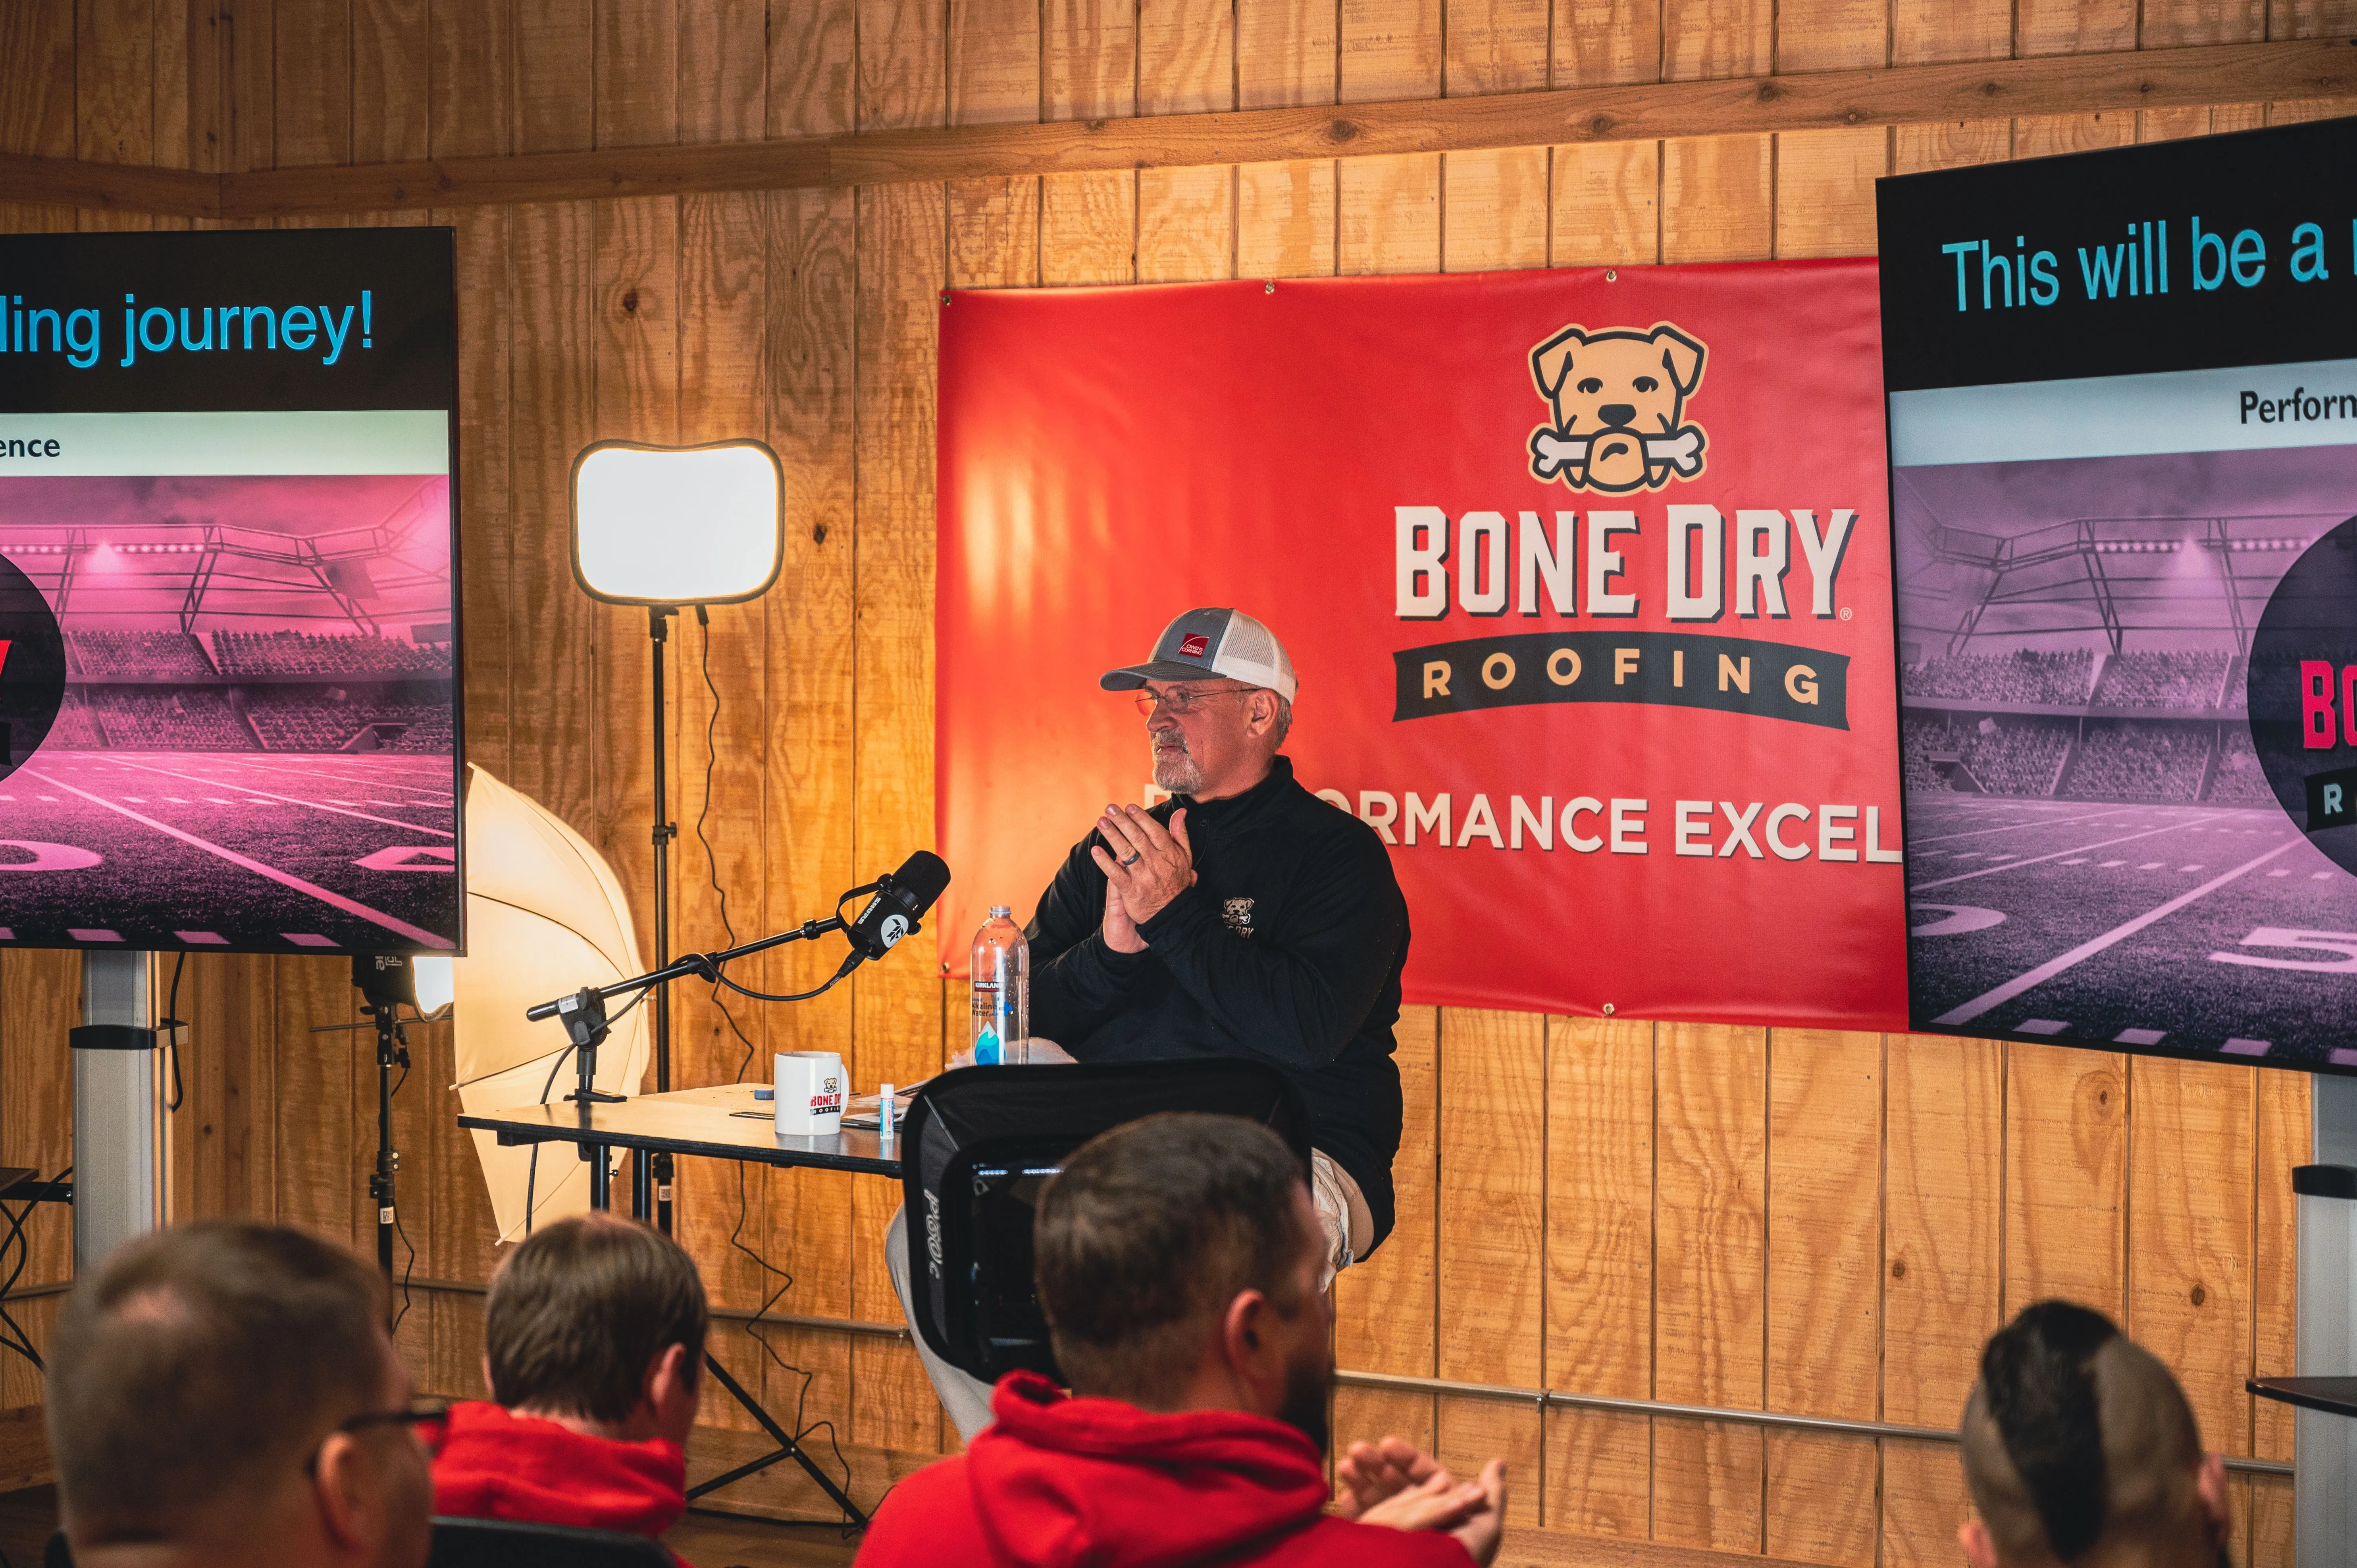 A speaker presenting to an audience with "Bone Dry Roofing Company" banners in the background.